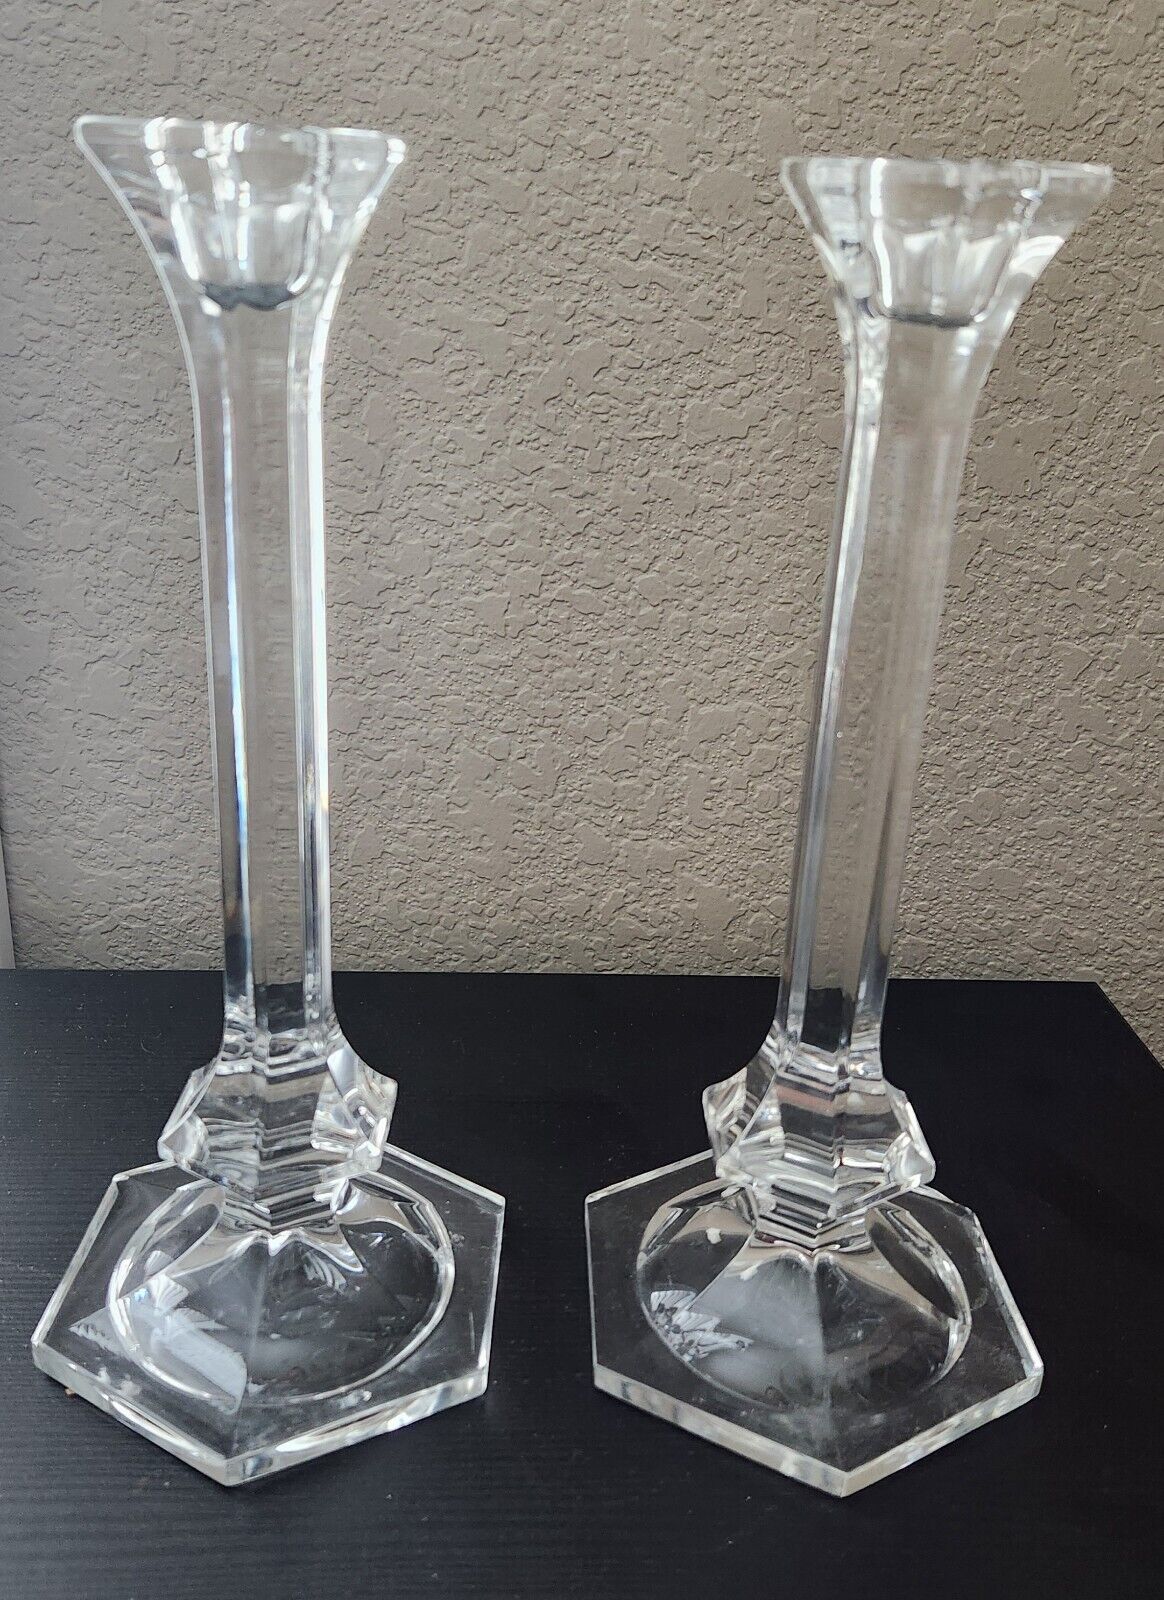 Vintage Crystal Tall Taper Candlestick Holders, Art Deco Crystal Candle Holders